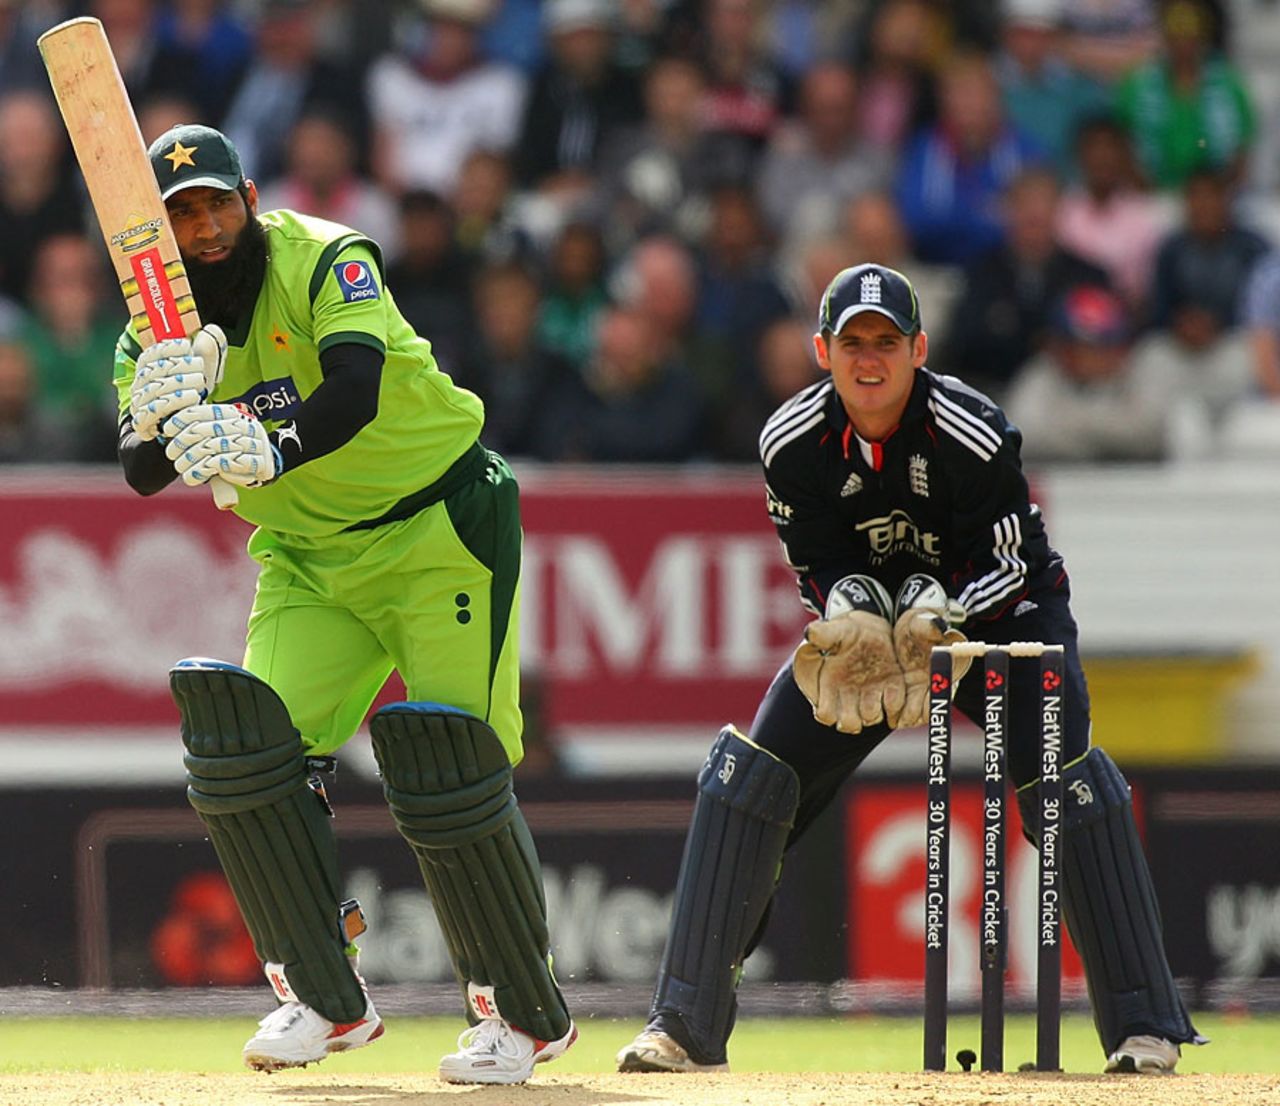 Mohammad Yousuf batted with languid ease as Pakistan built a big total, England v Pakistan, 2nd ODI, Headingley, September 12, 2010